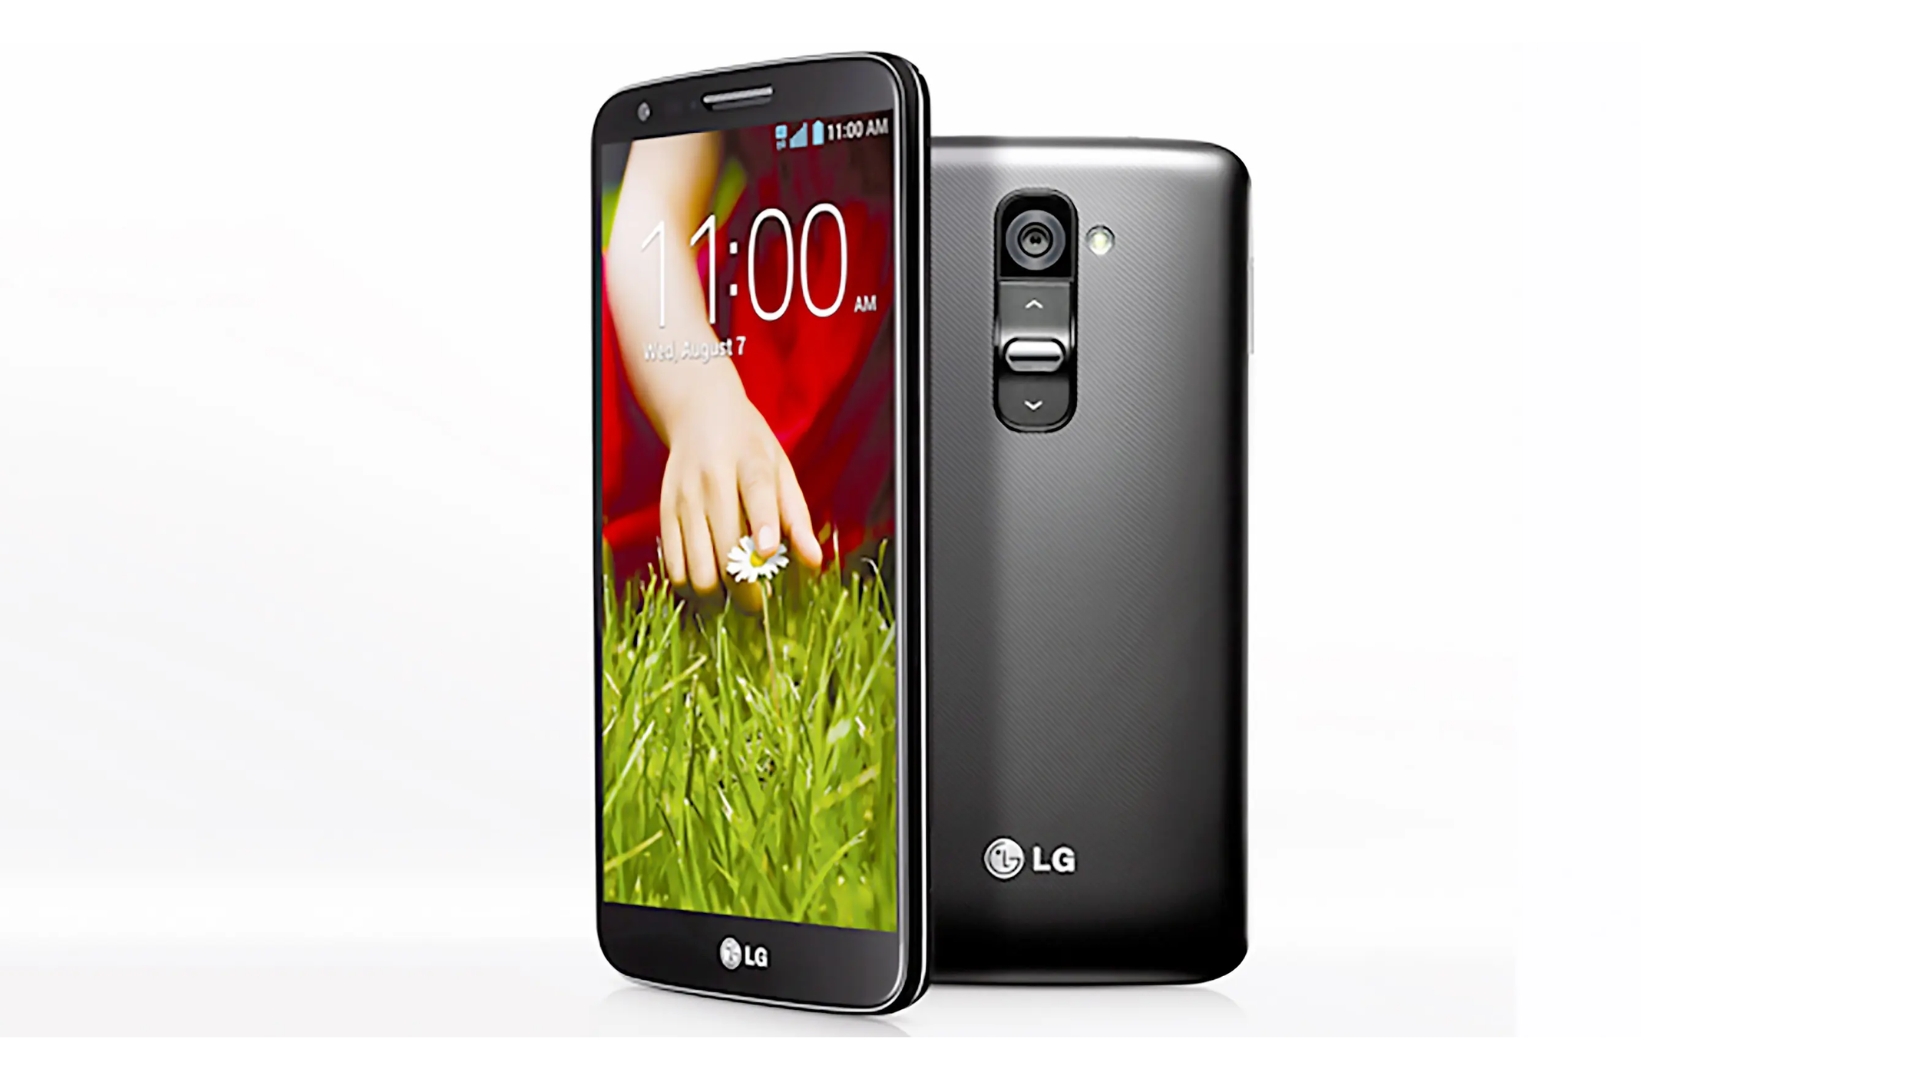 LG Optimus G2 May Include Innovative Buttons Placements